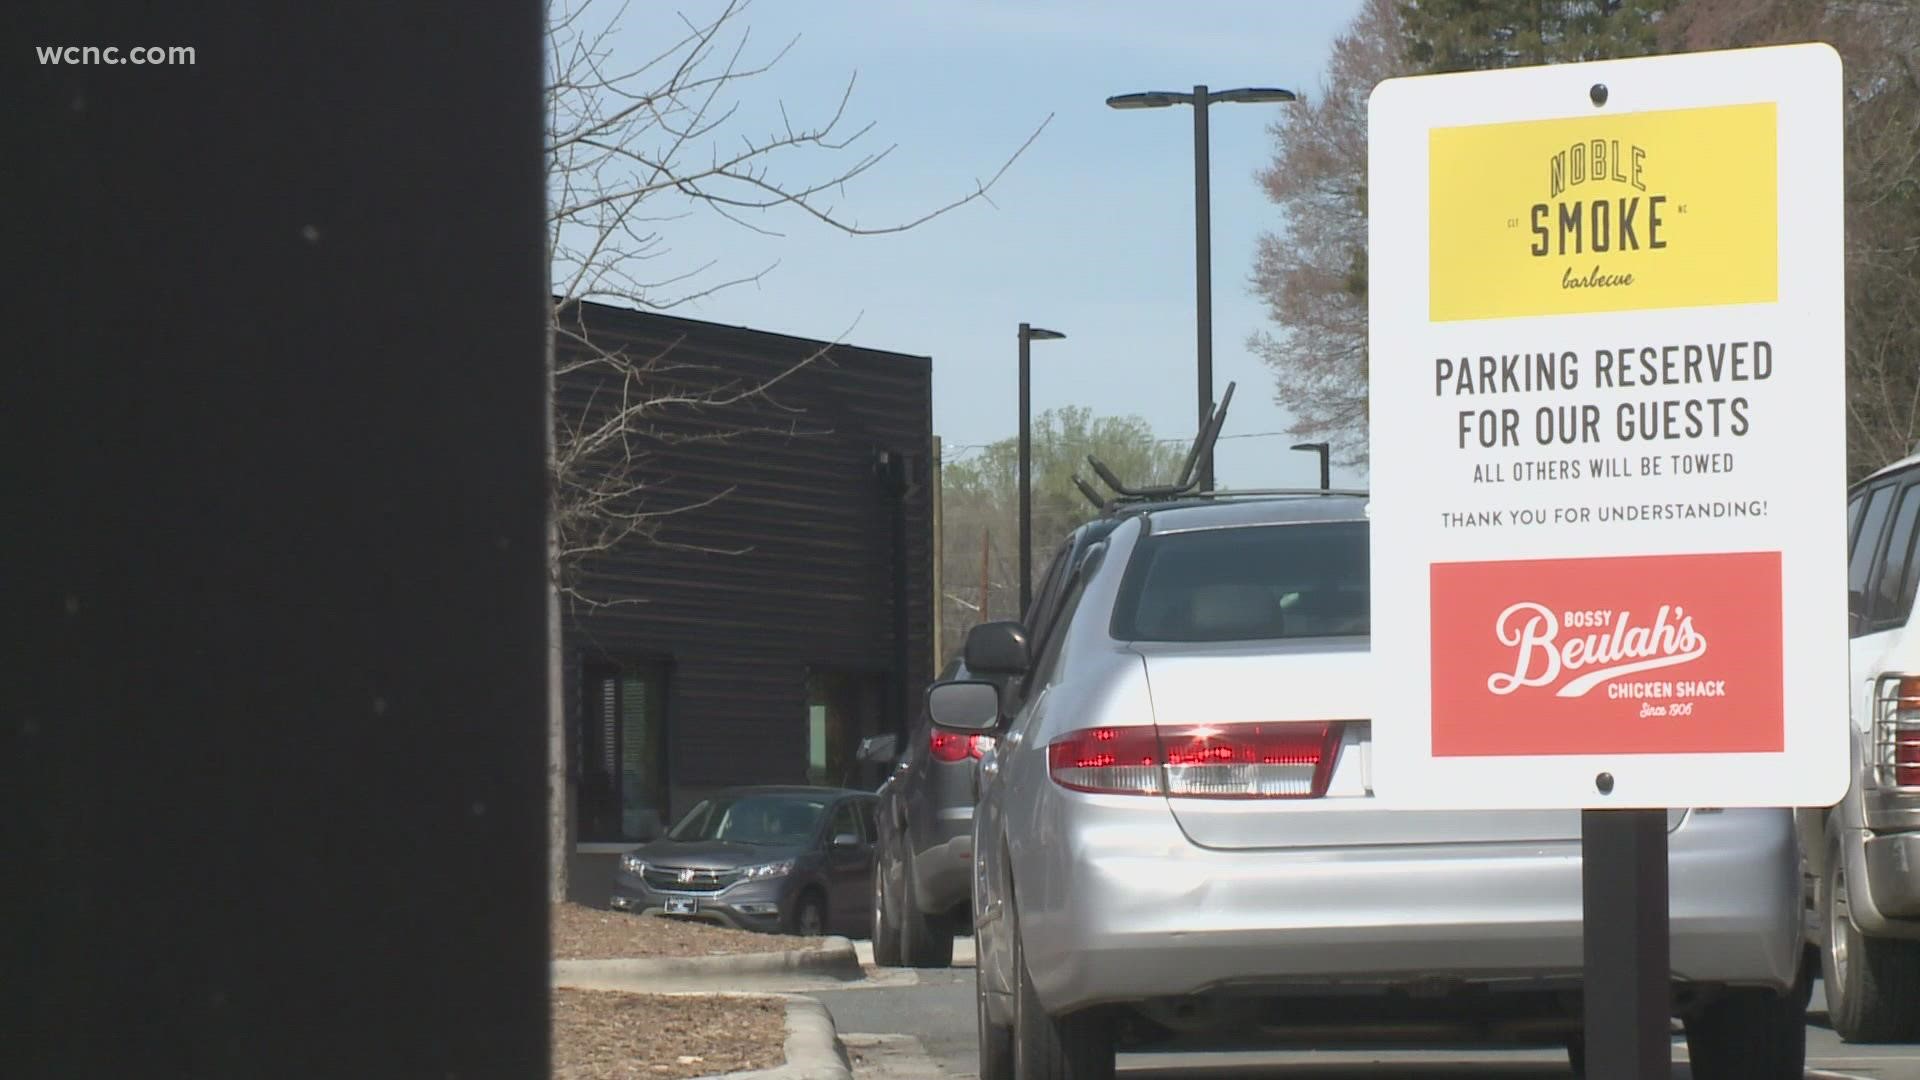 A Charlotte business owner is accusing a restaurant of hurting her business by preventing her customers from using a parking lot they share.